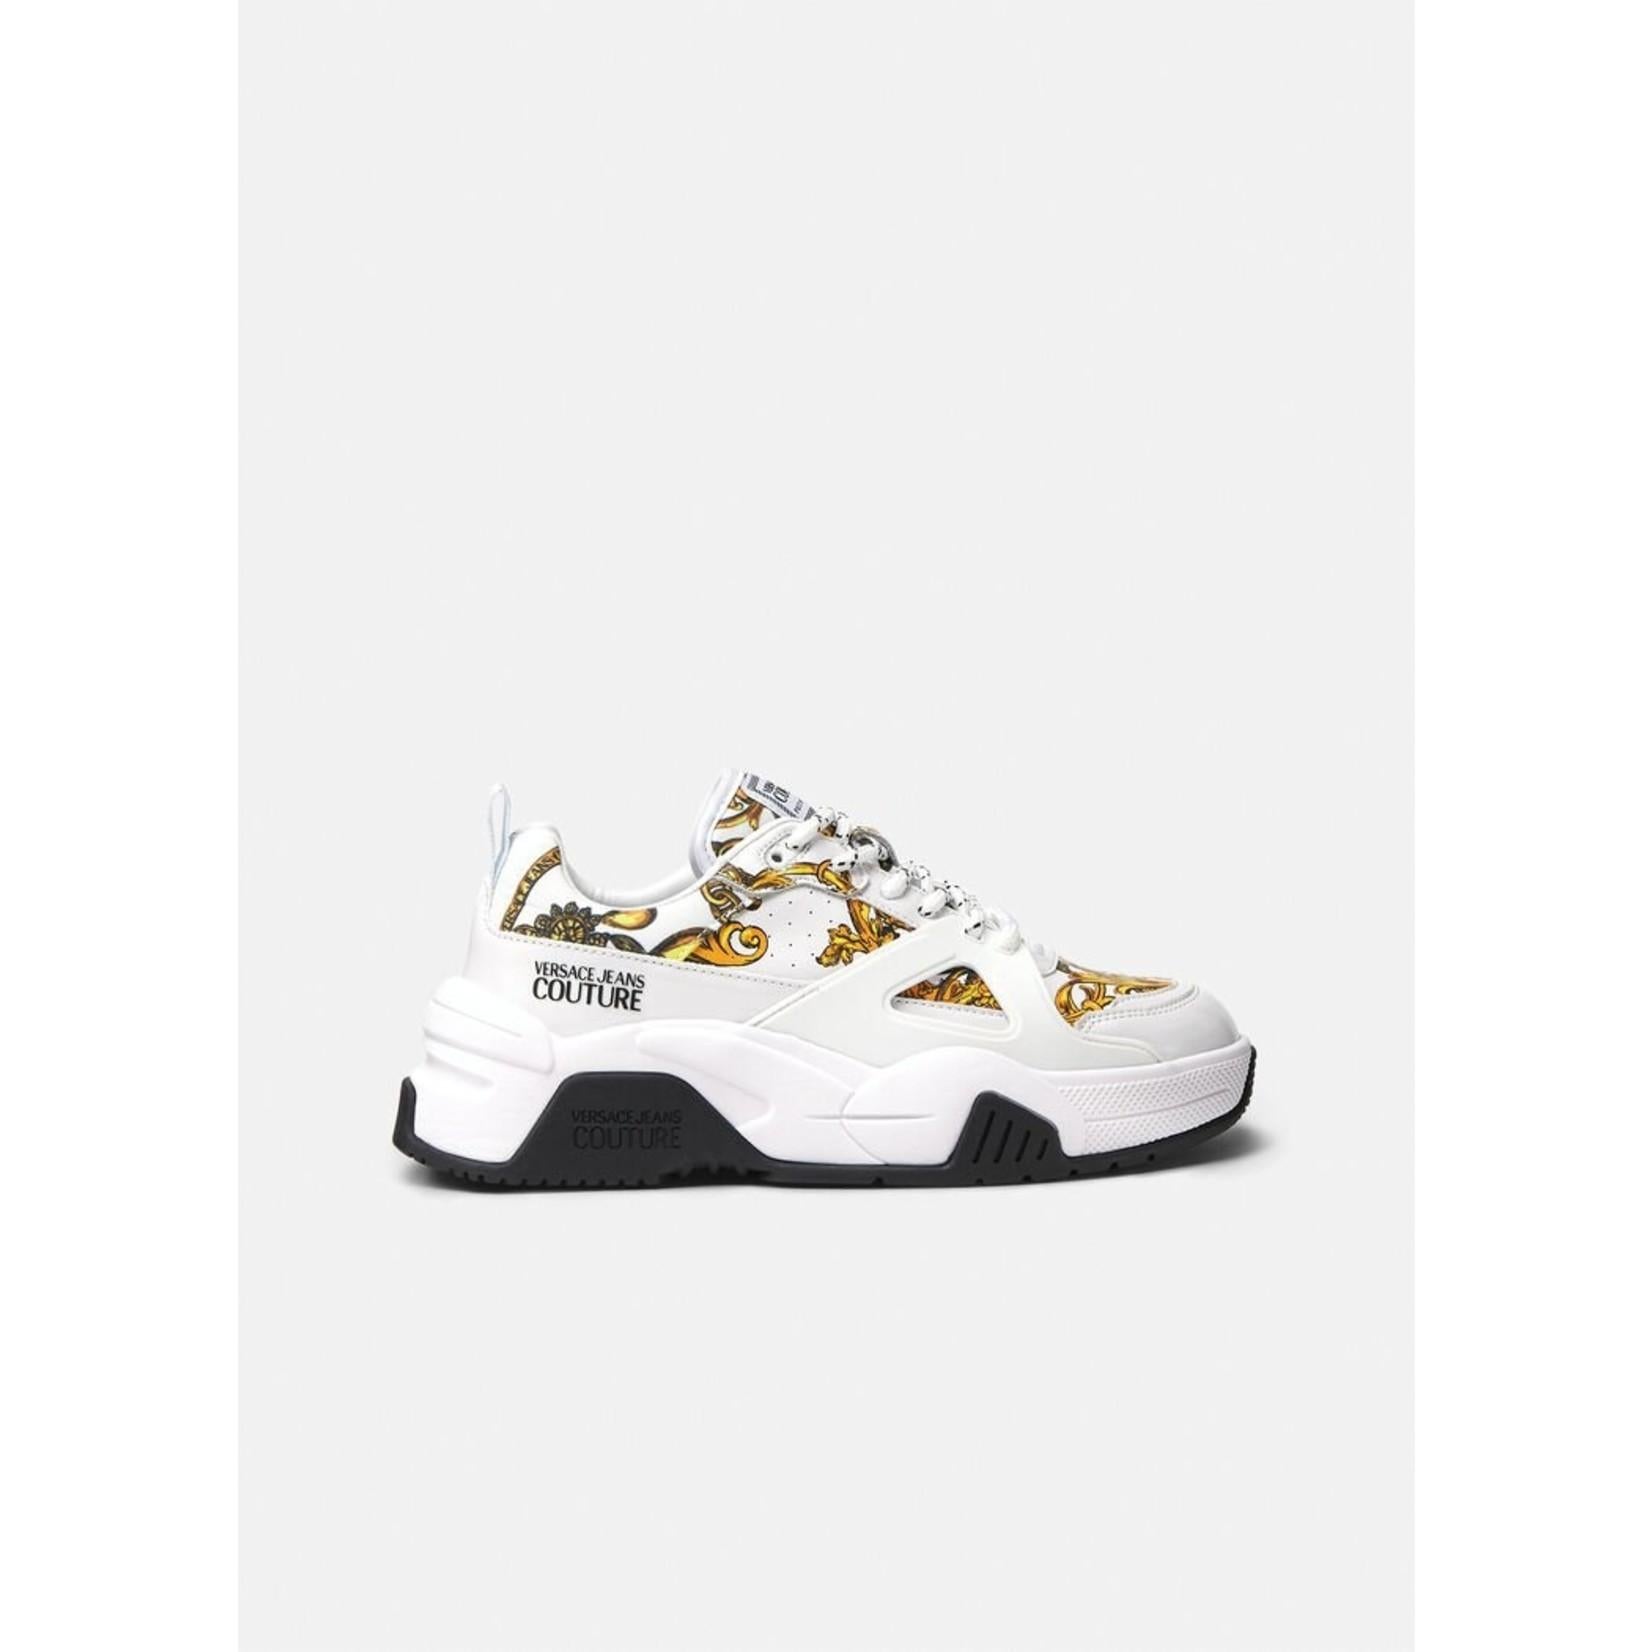 Gray Versace Jeans Couture White Baroque Print Gold Sneakers SZ 36 New in Box For Sale